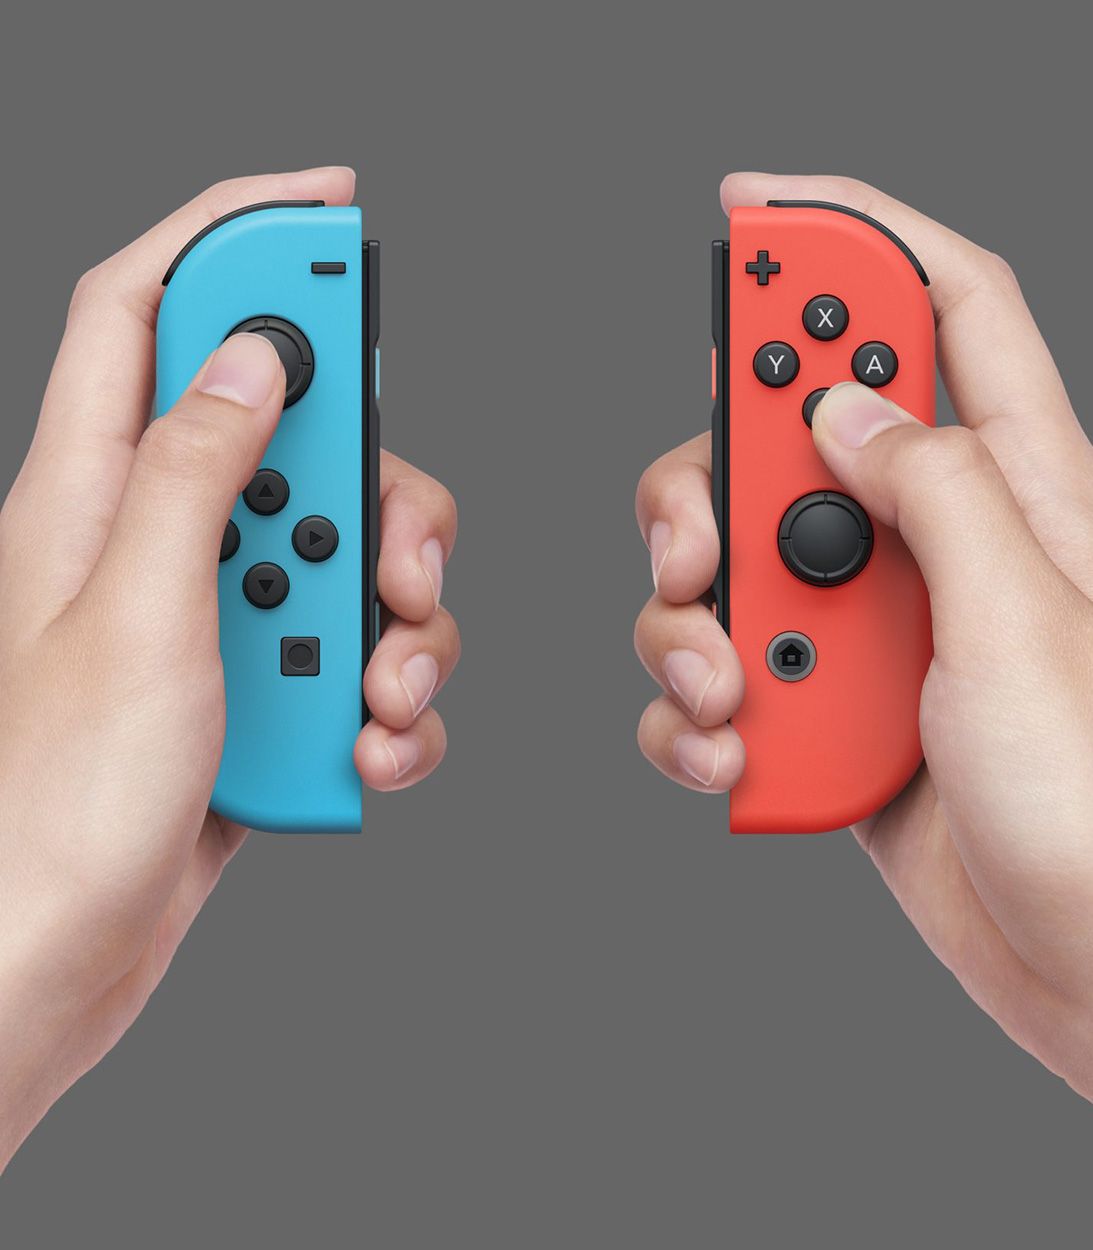 Neon red and blue joy-con controllers